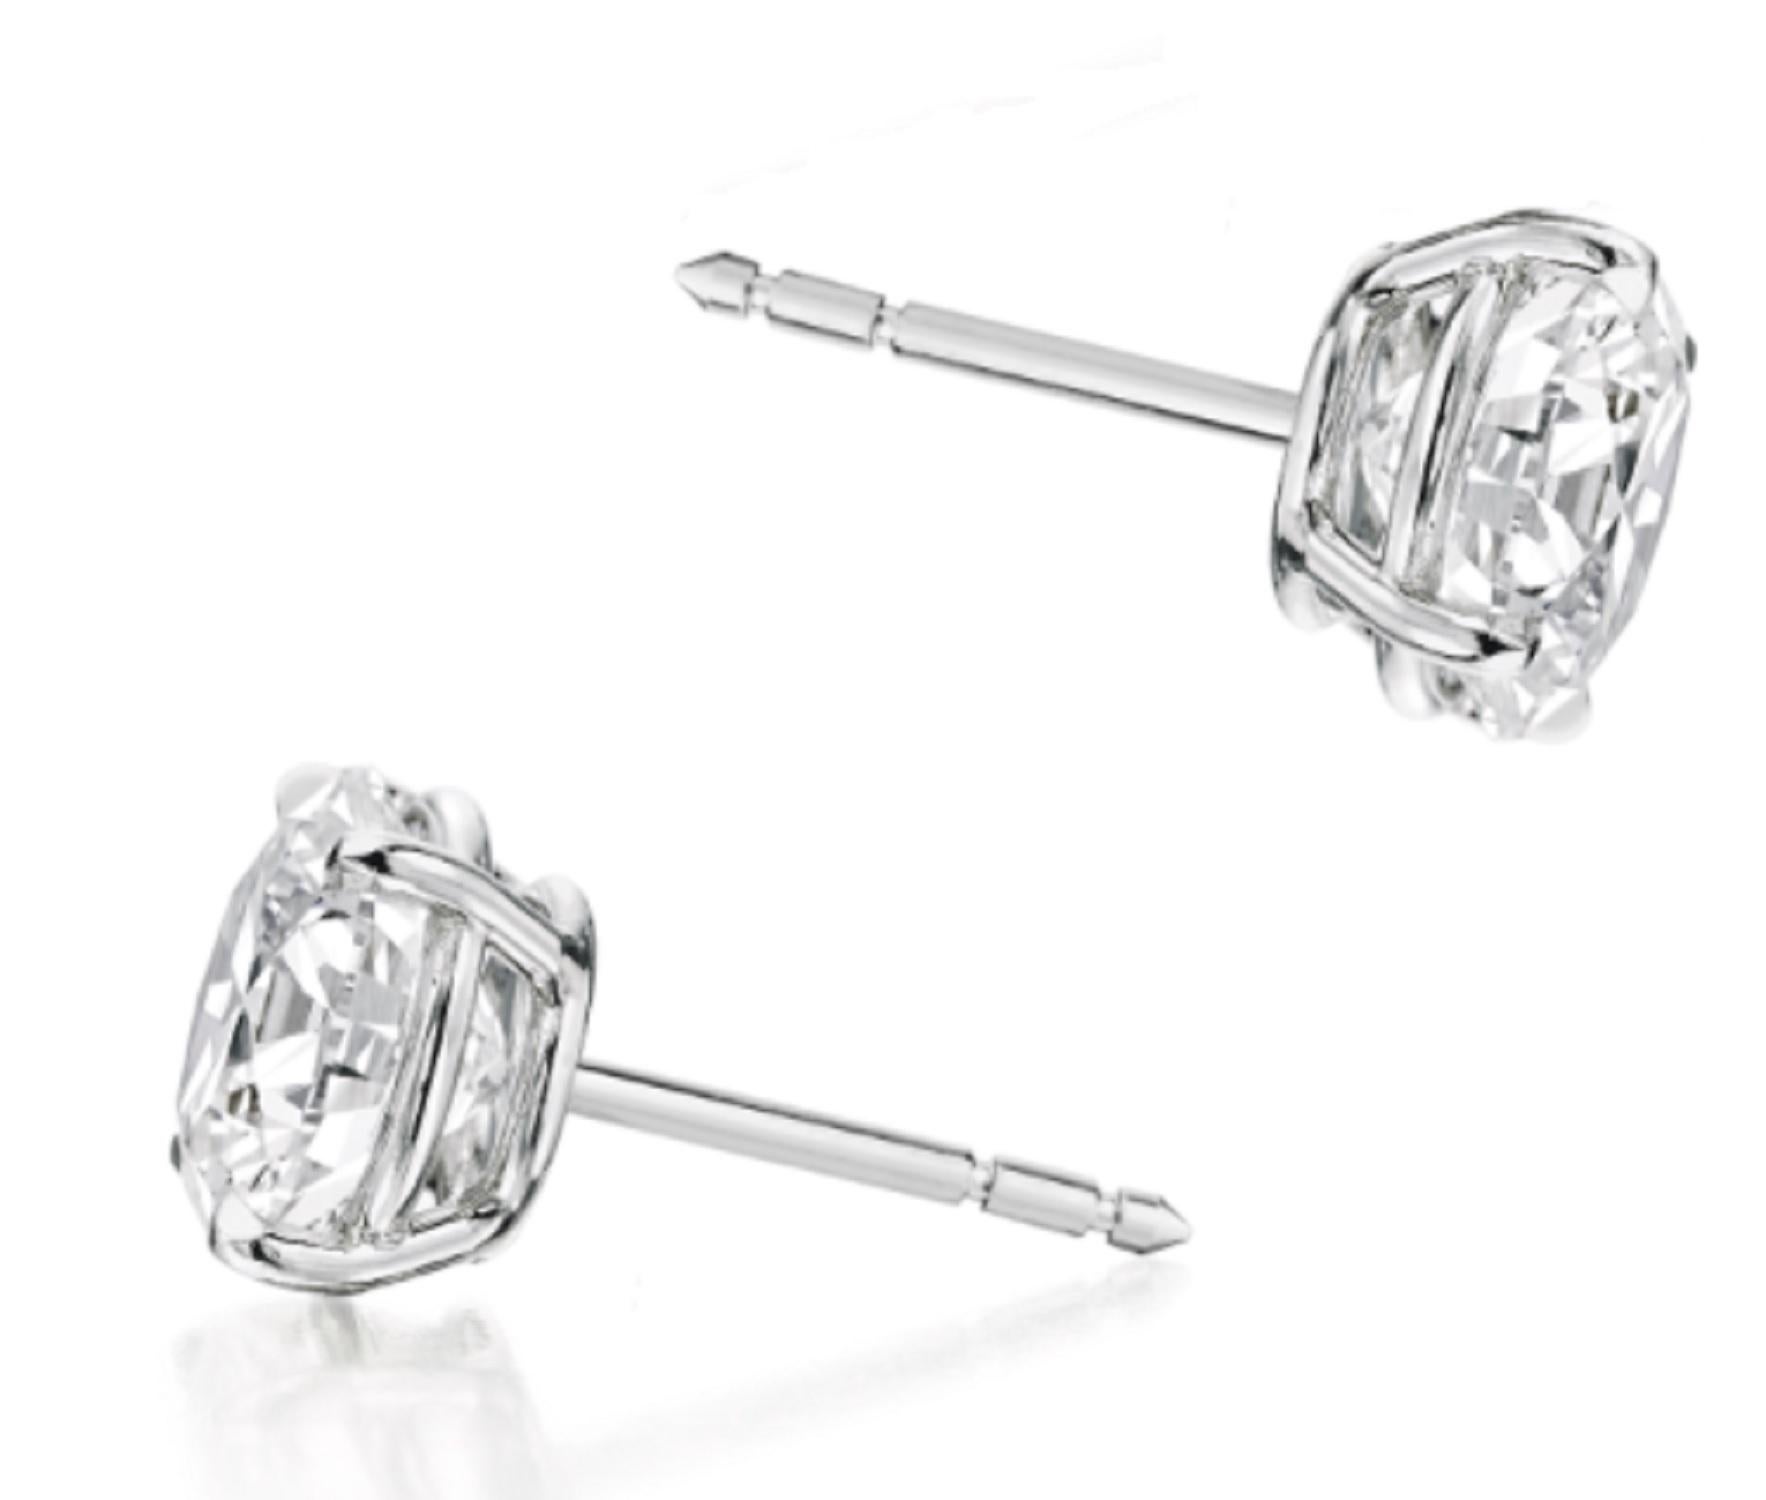 Classic-style studs, each centering an internally flawless round brilliant-cut diamond.

Diamonds weighing a total 3.02 carats.
G.I.A. certification.